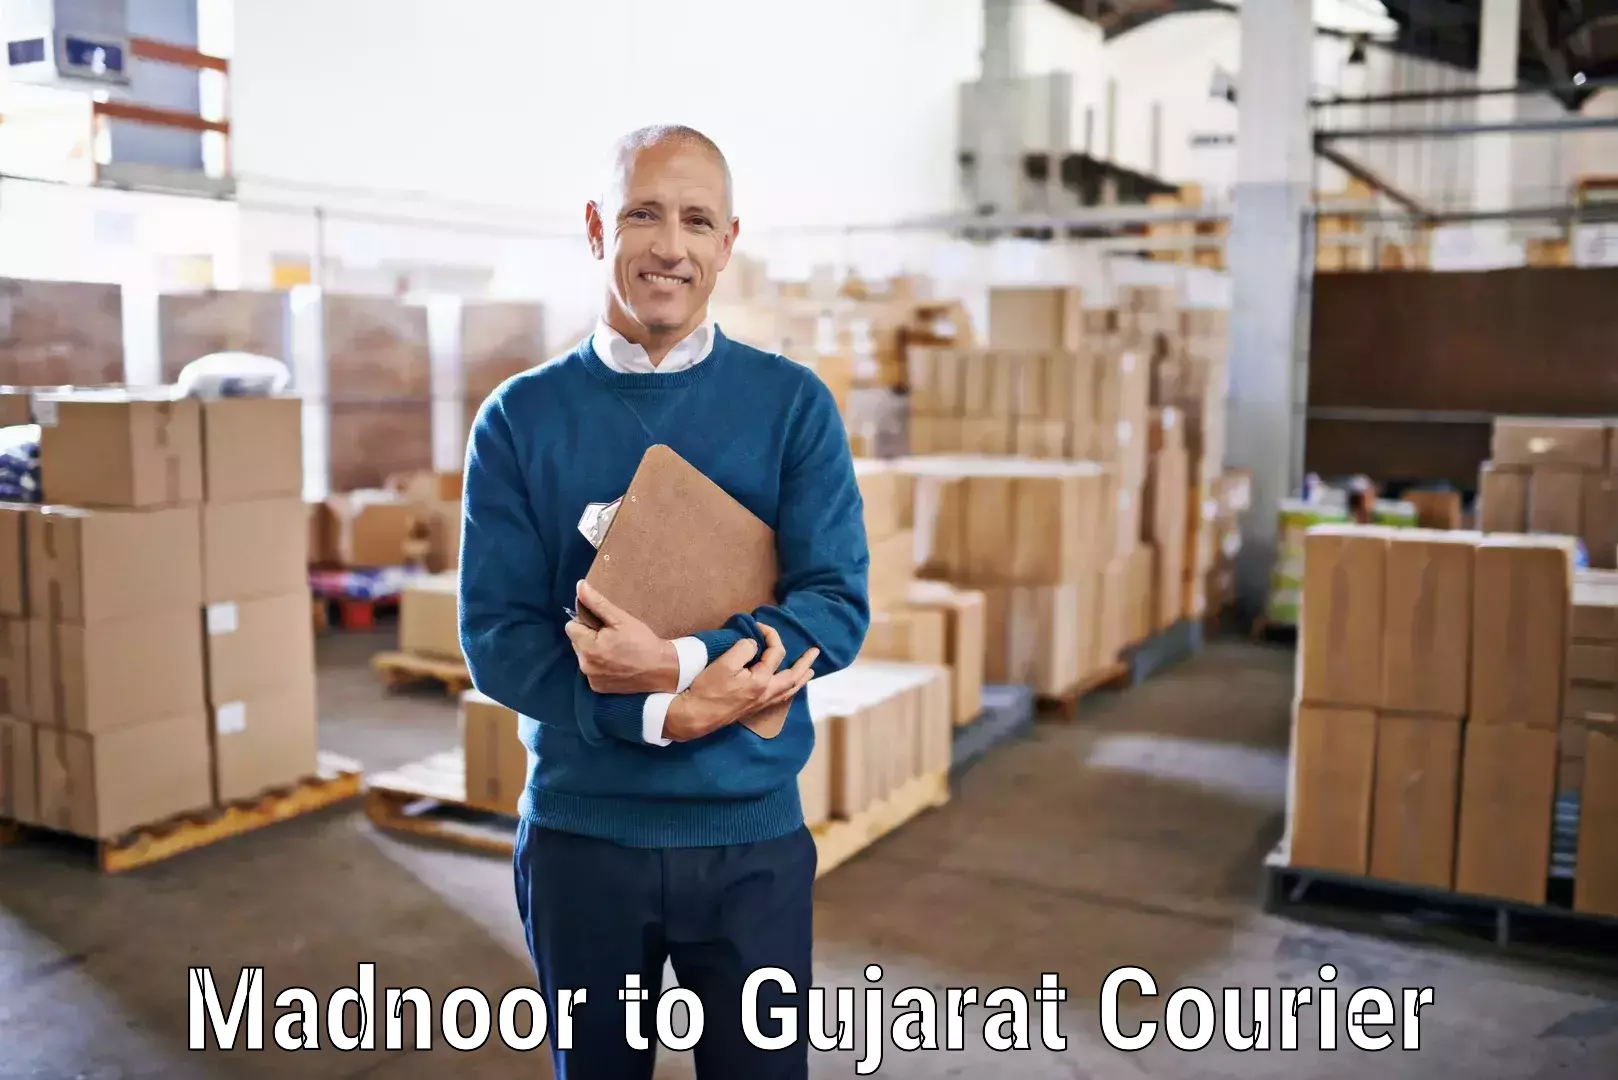 Nationwide shipping coverage Madnoor to Patan Gujarat